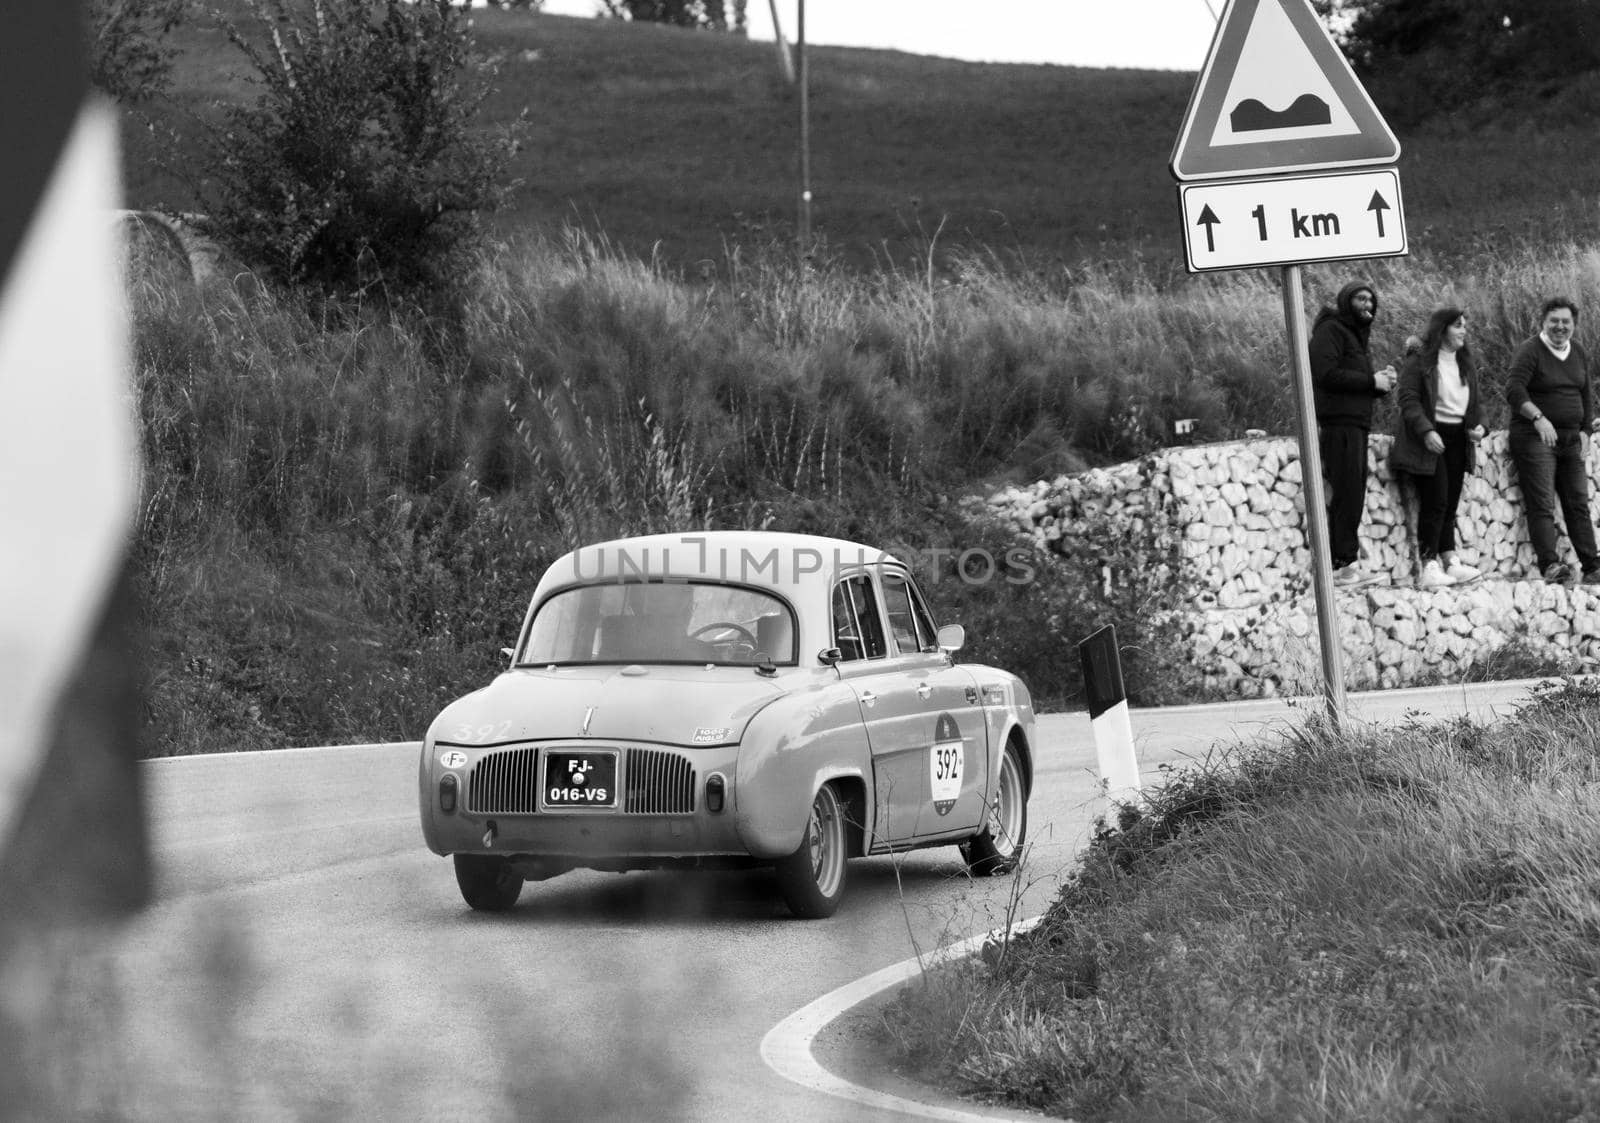 RENAULT DAUPHINE 1957 on an old racing car in rally Mille Miglia 2020 the famous italian historical race (1927-1957 by massimocampanari